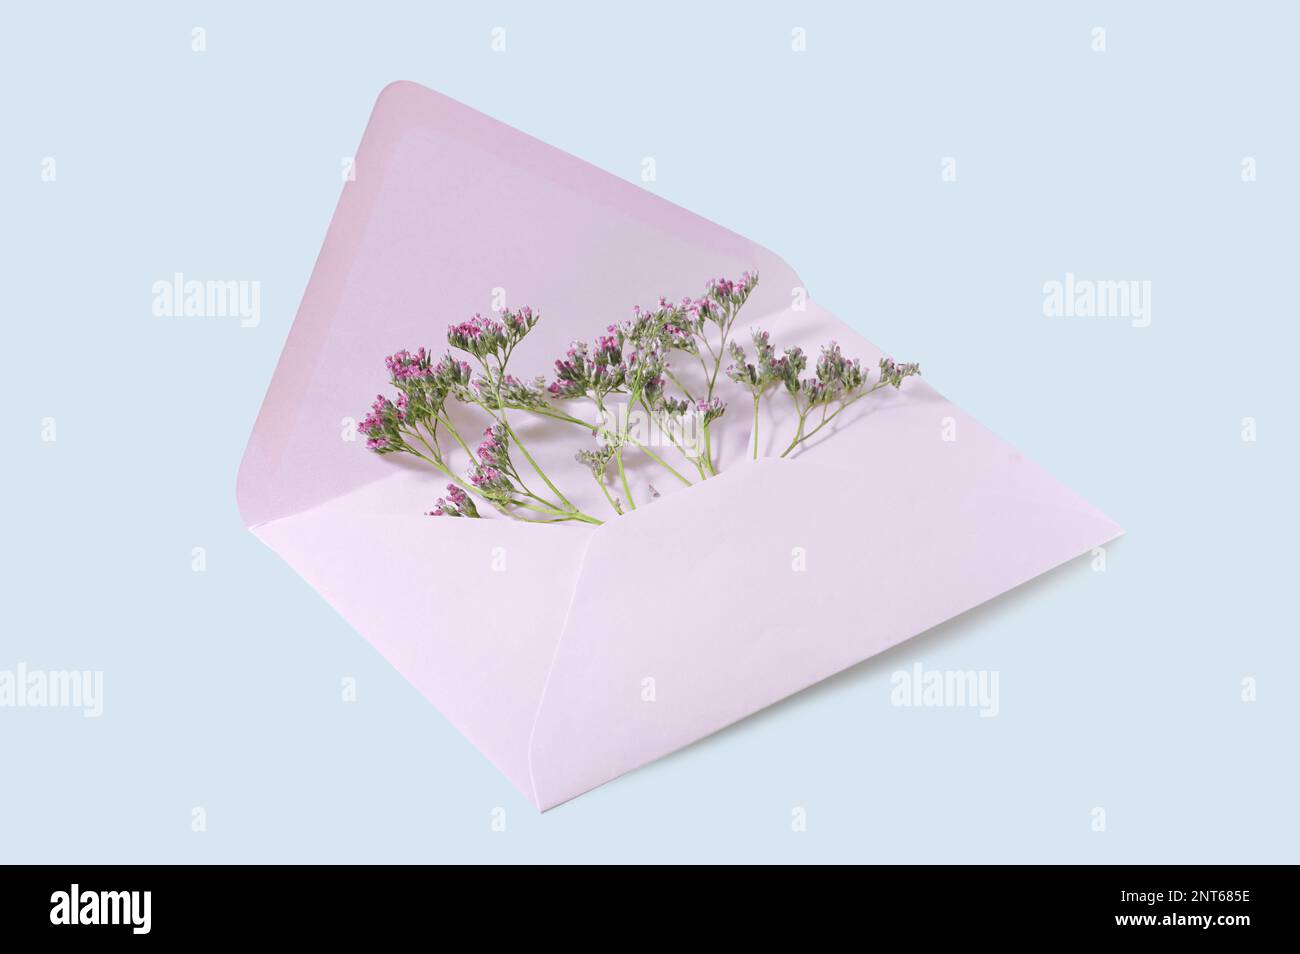 Open pink envelope with some small pink flowers in it as a congratulation greeting or love symbol for holidays like valentines, birthday, mothers day Stock Photo